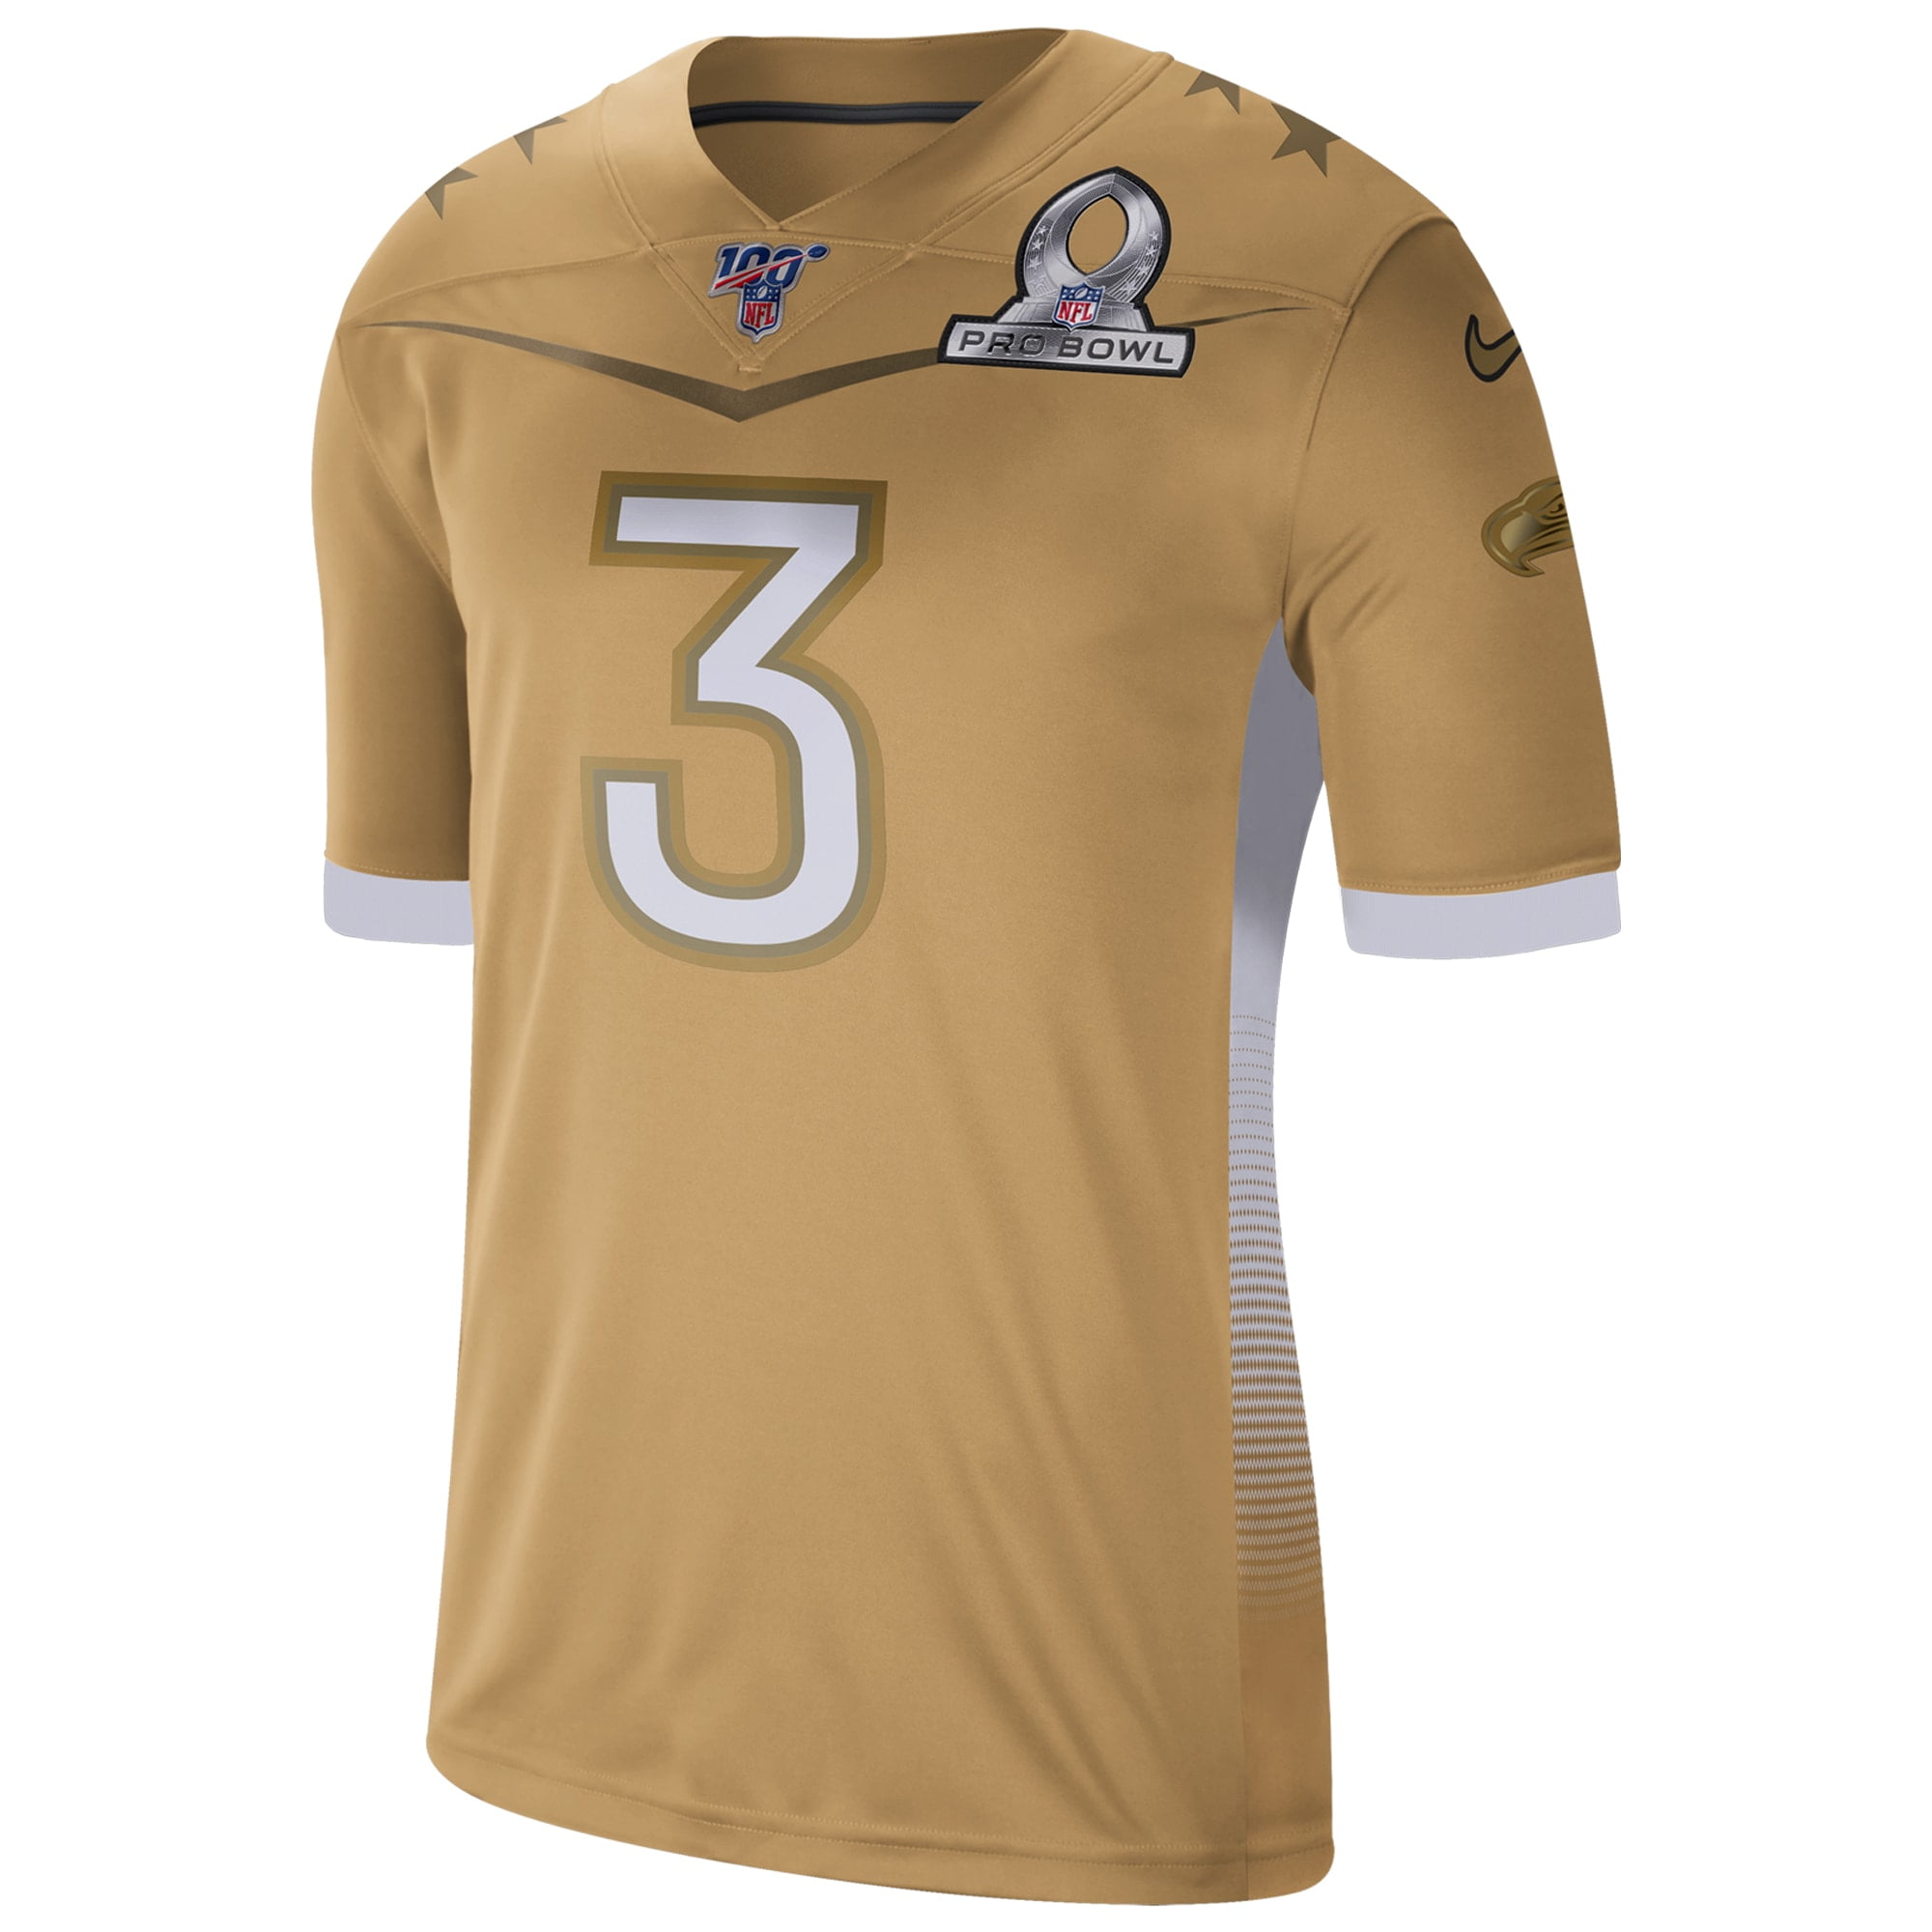 Russell Wilson Nike 2020 NFC Pro Bowl Game Jersey - Gold